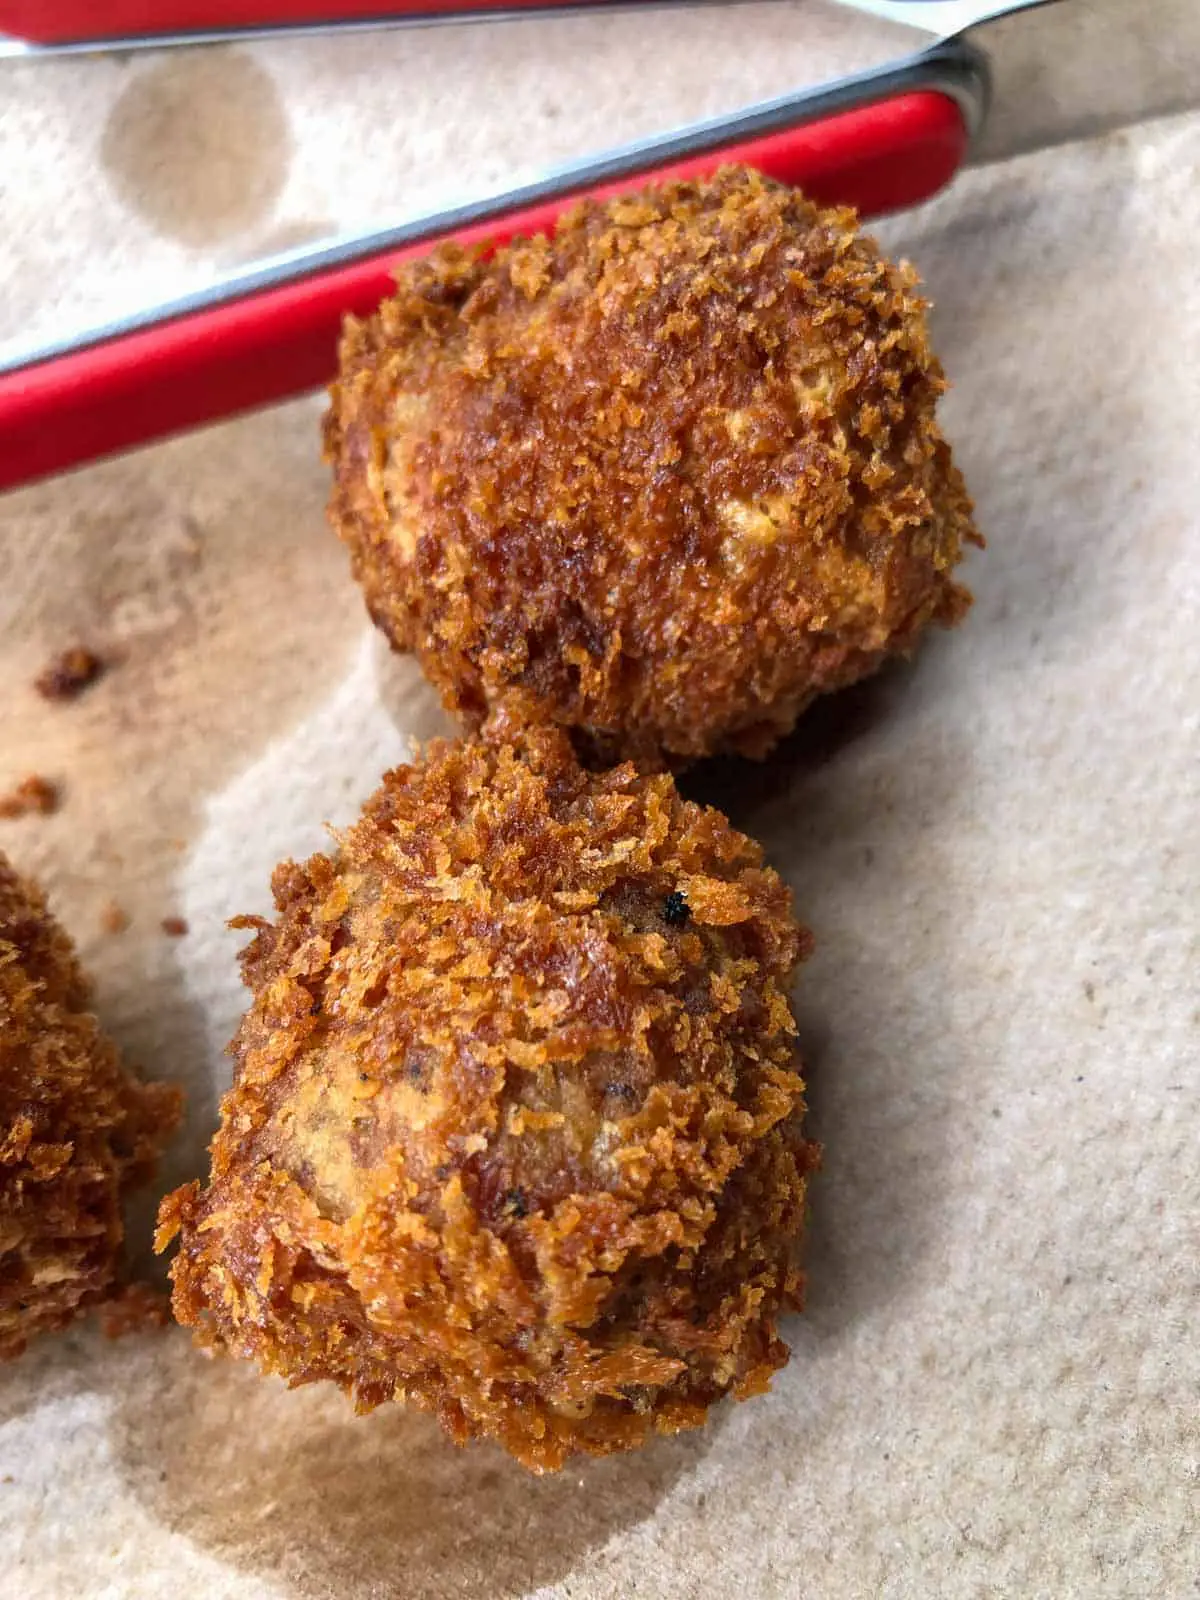 Boudin Balls draining on paper towels with a pair of red tongs behind them